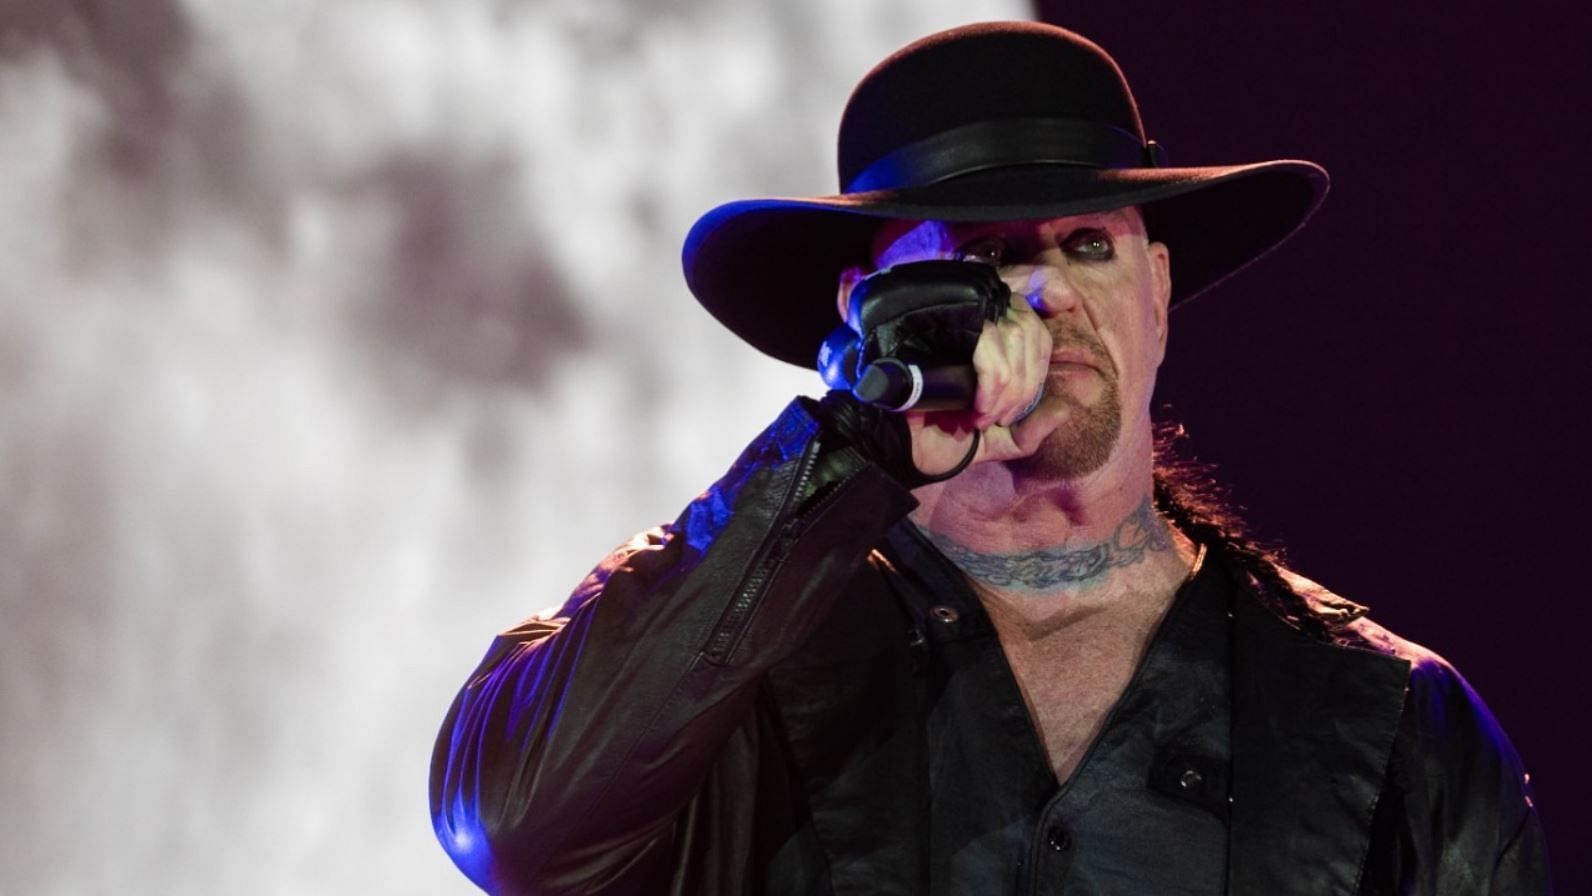 The Undertaker believes WrestleMania is Super Bowl of the wrestling world